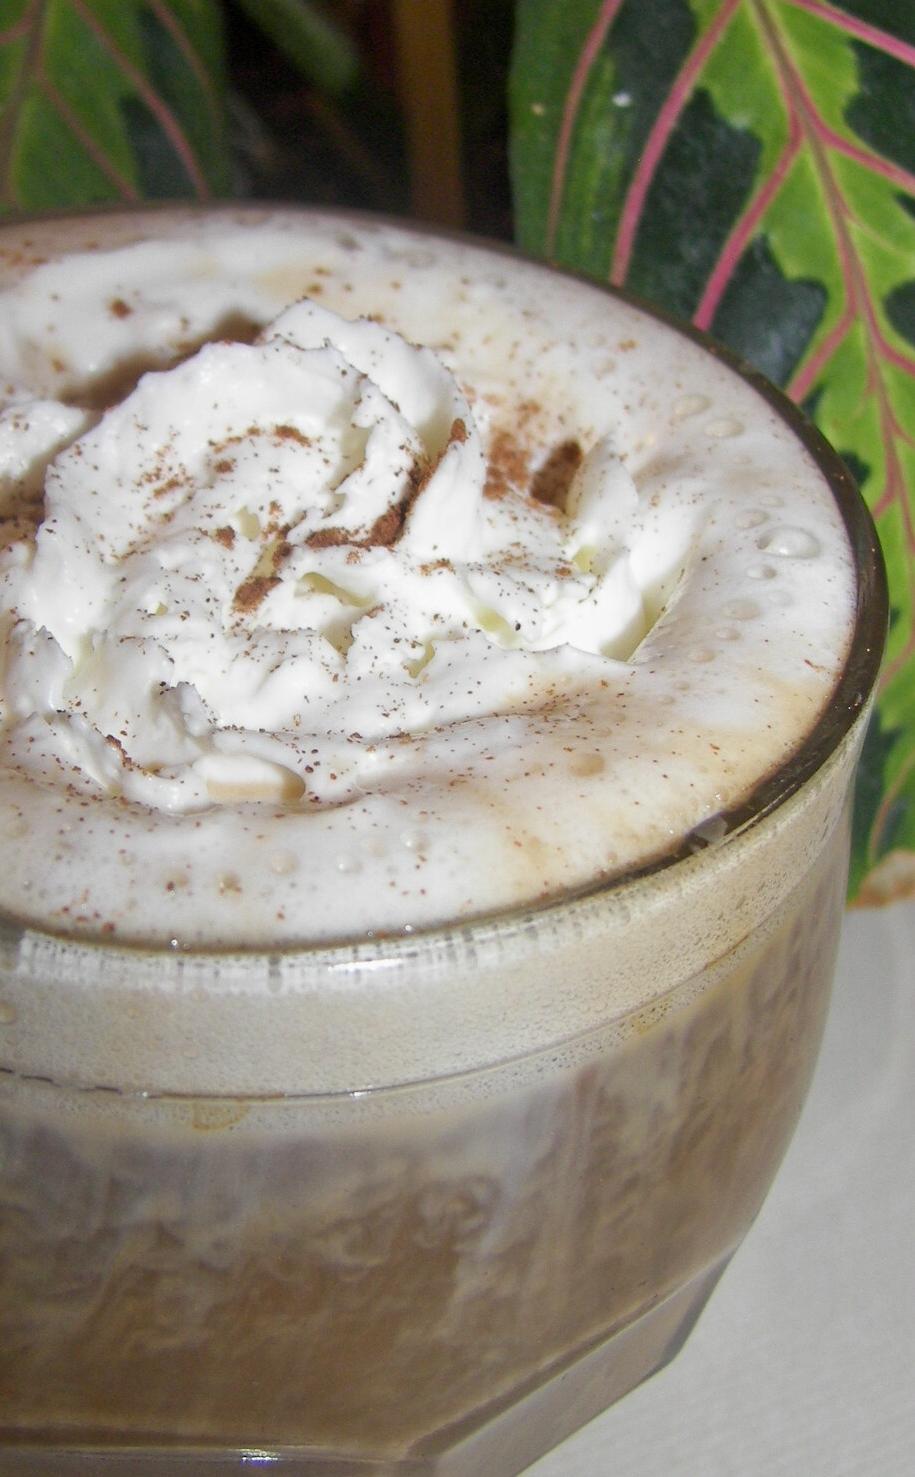  Leave the pumpkin spice latte aside and try this Spiced Irish Coffee instead